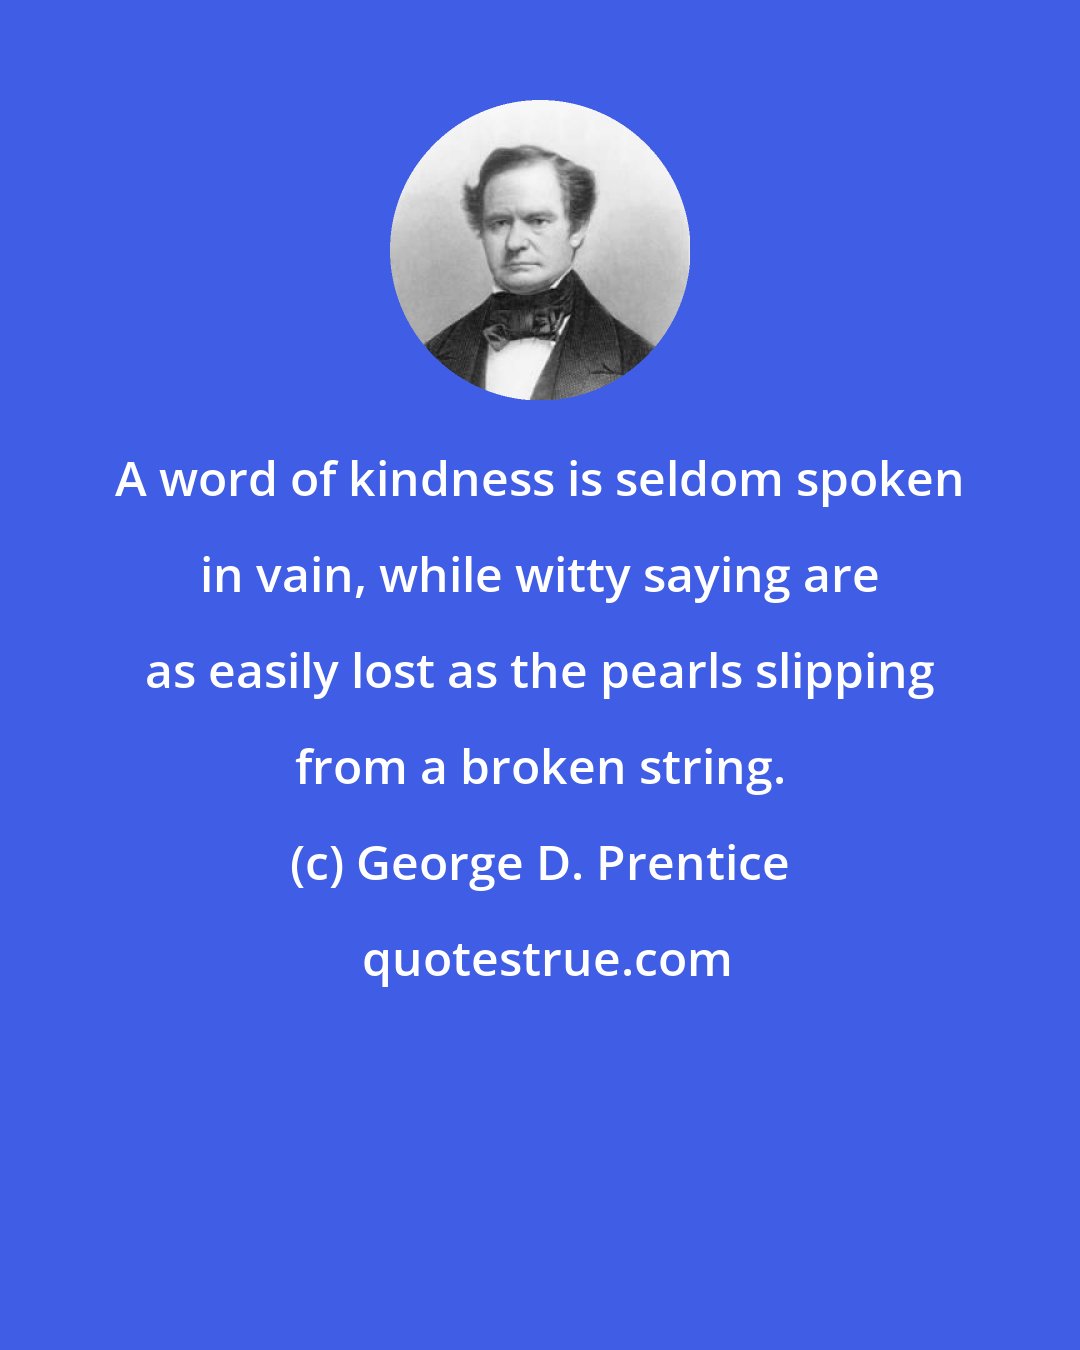 George D. Prentice: A word of kindness is seldom spoken in vain, while witty saying are as easily lost as the pearls slipping from a broken string.